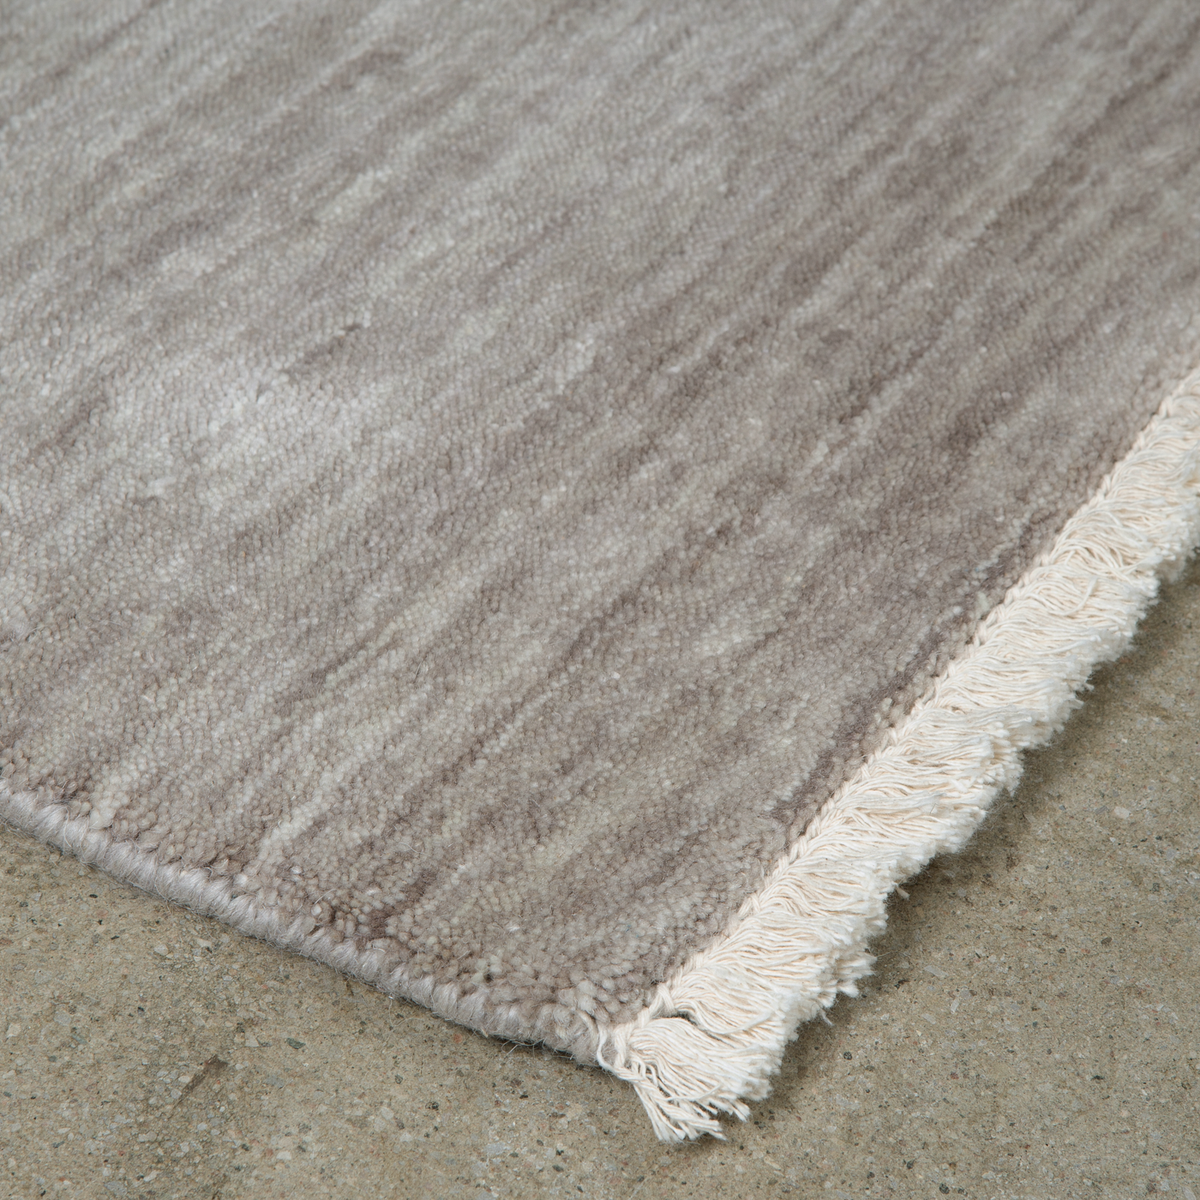 The Mkt Signature Rug Collection seamlessly blends texture, colour and detail with quality materials and artisanal craftsmanship.